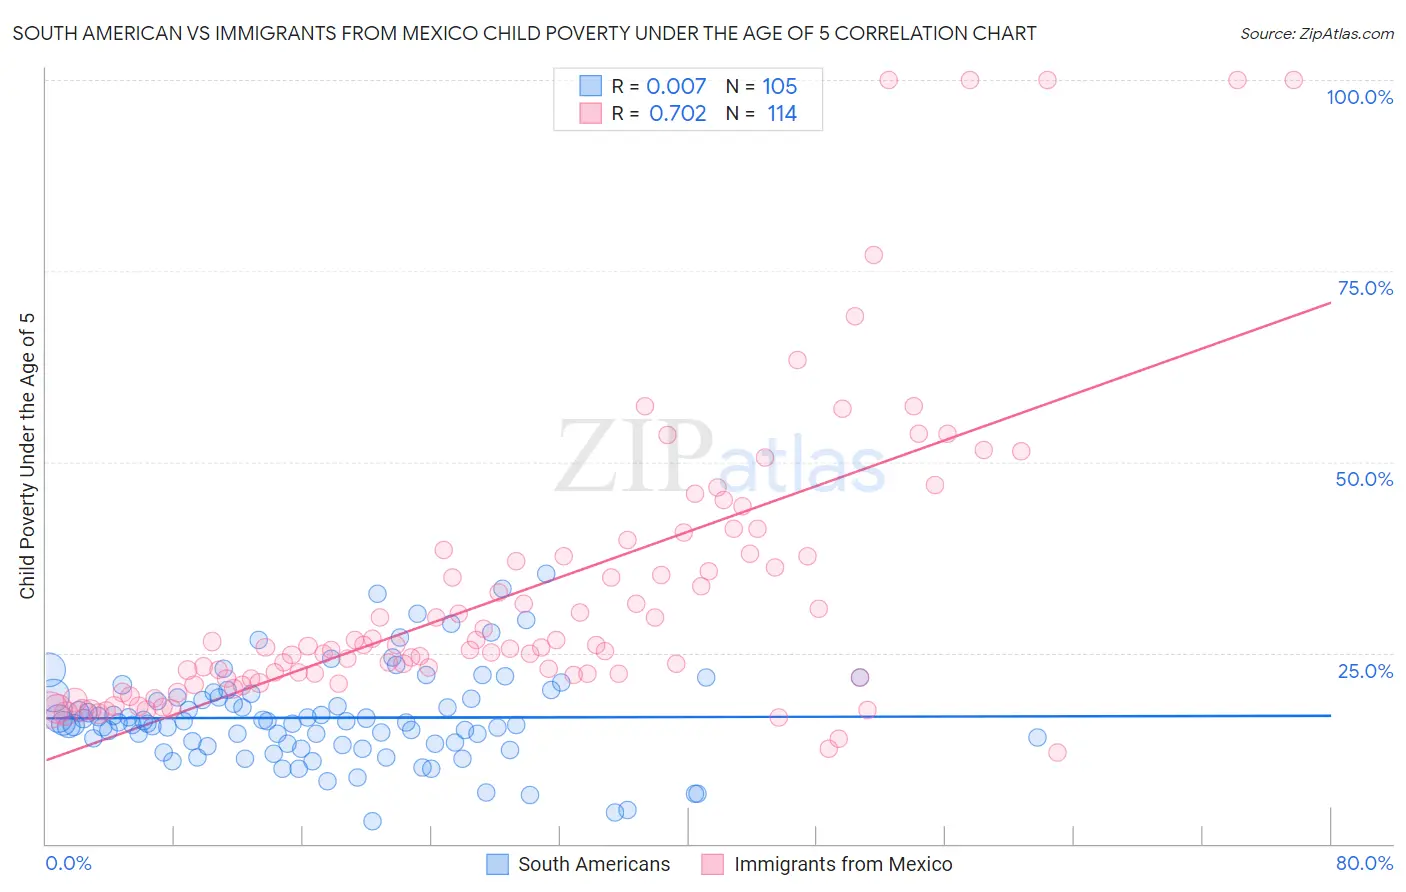 South American vs Immigrants from Mexico Child Poverty Under the Age of 5